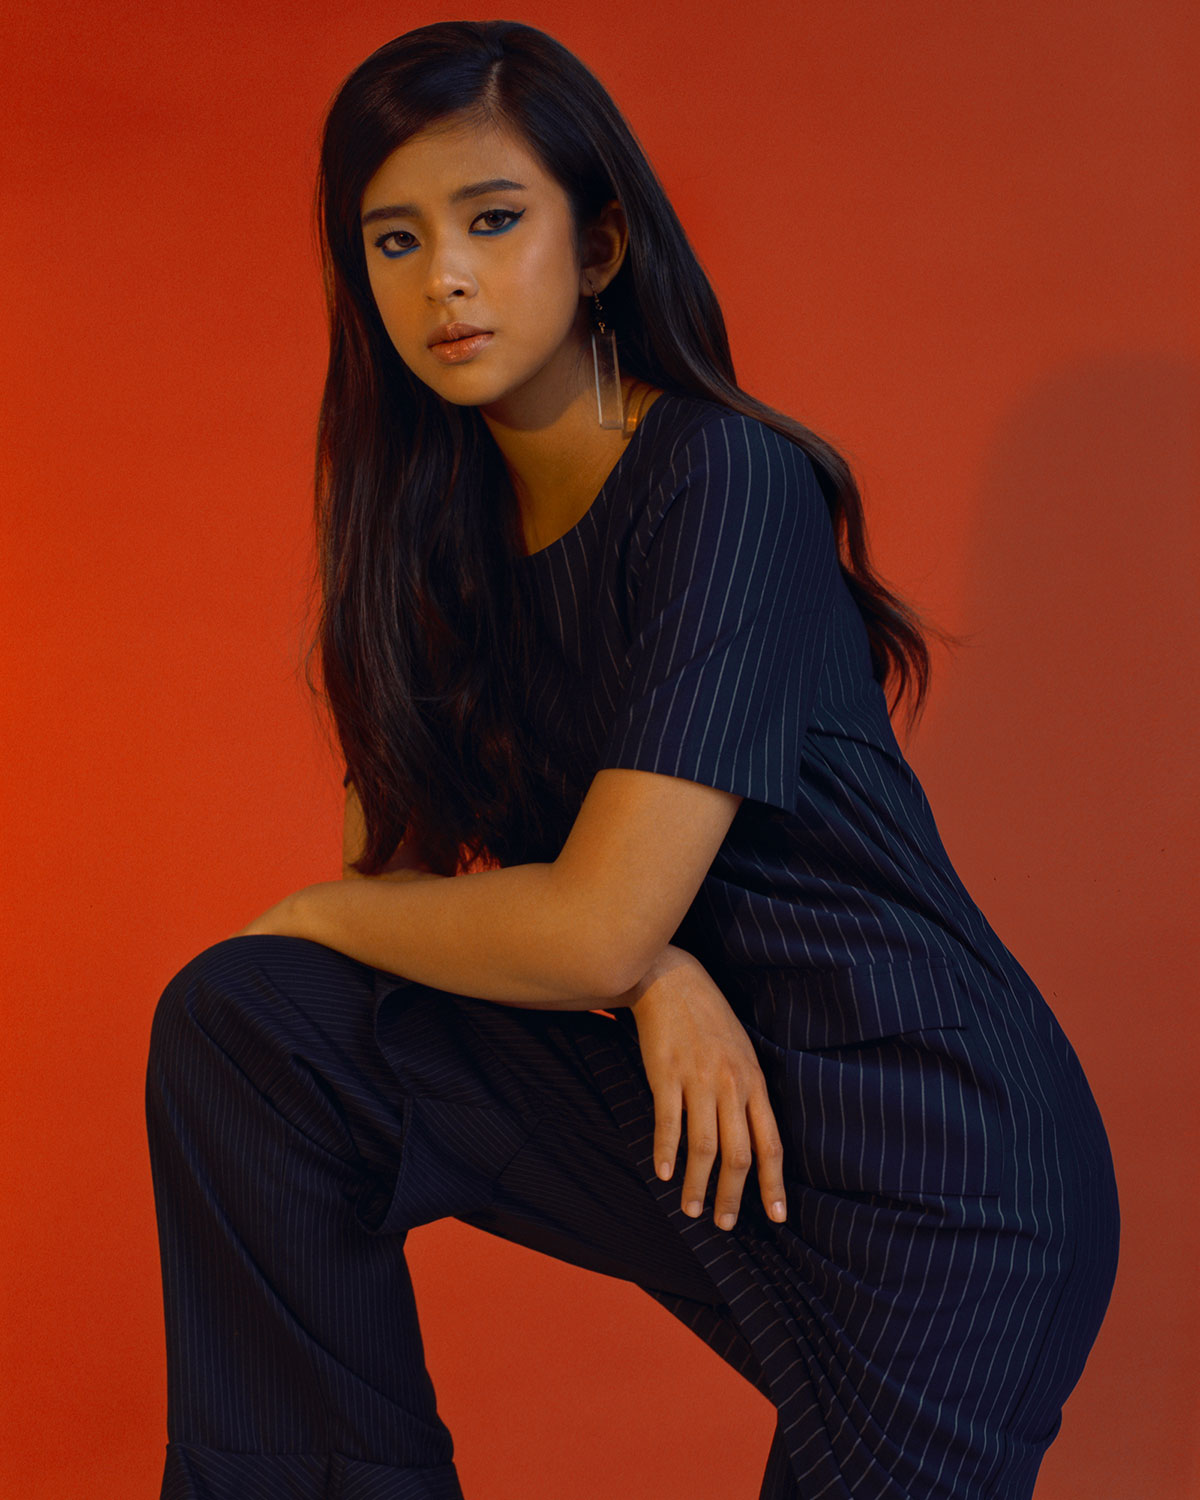 Back in high school, Gabbi Garcia discovered she had a love for bands like The Script and Maroon 5